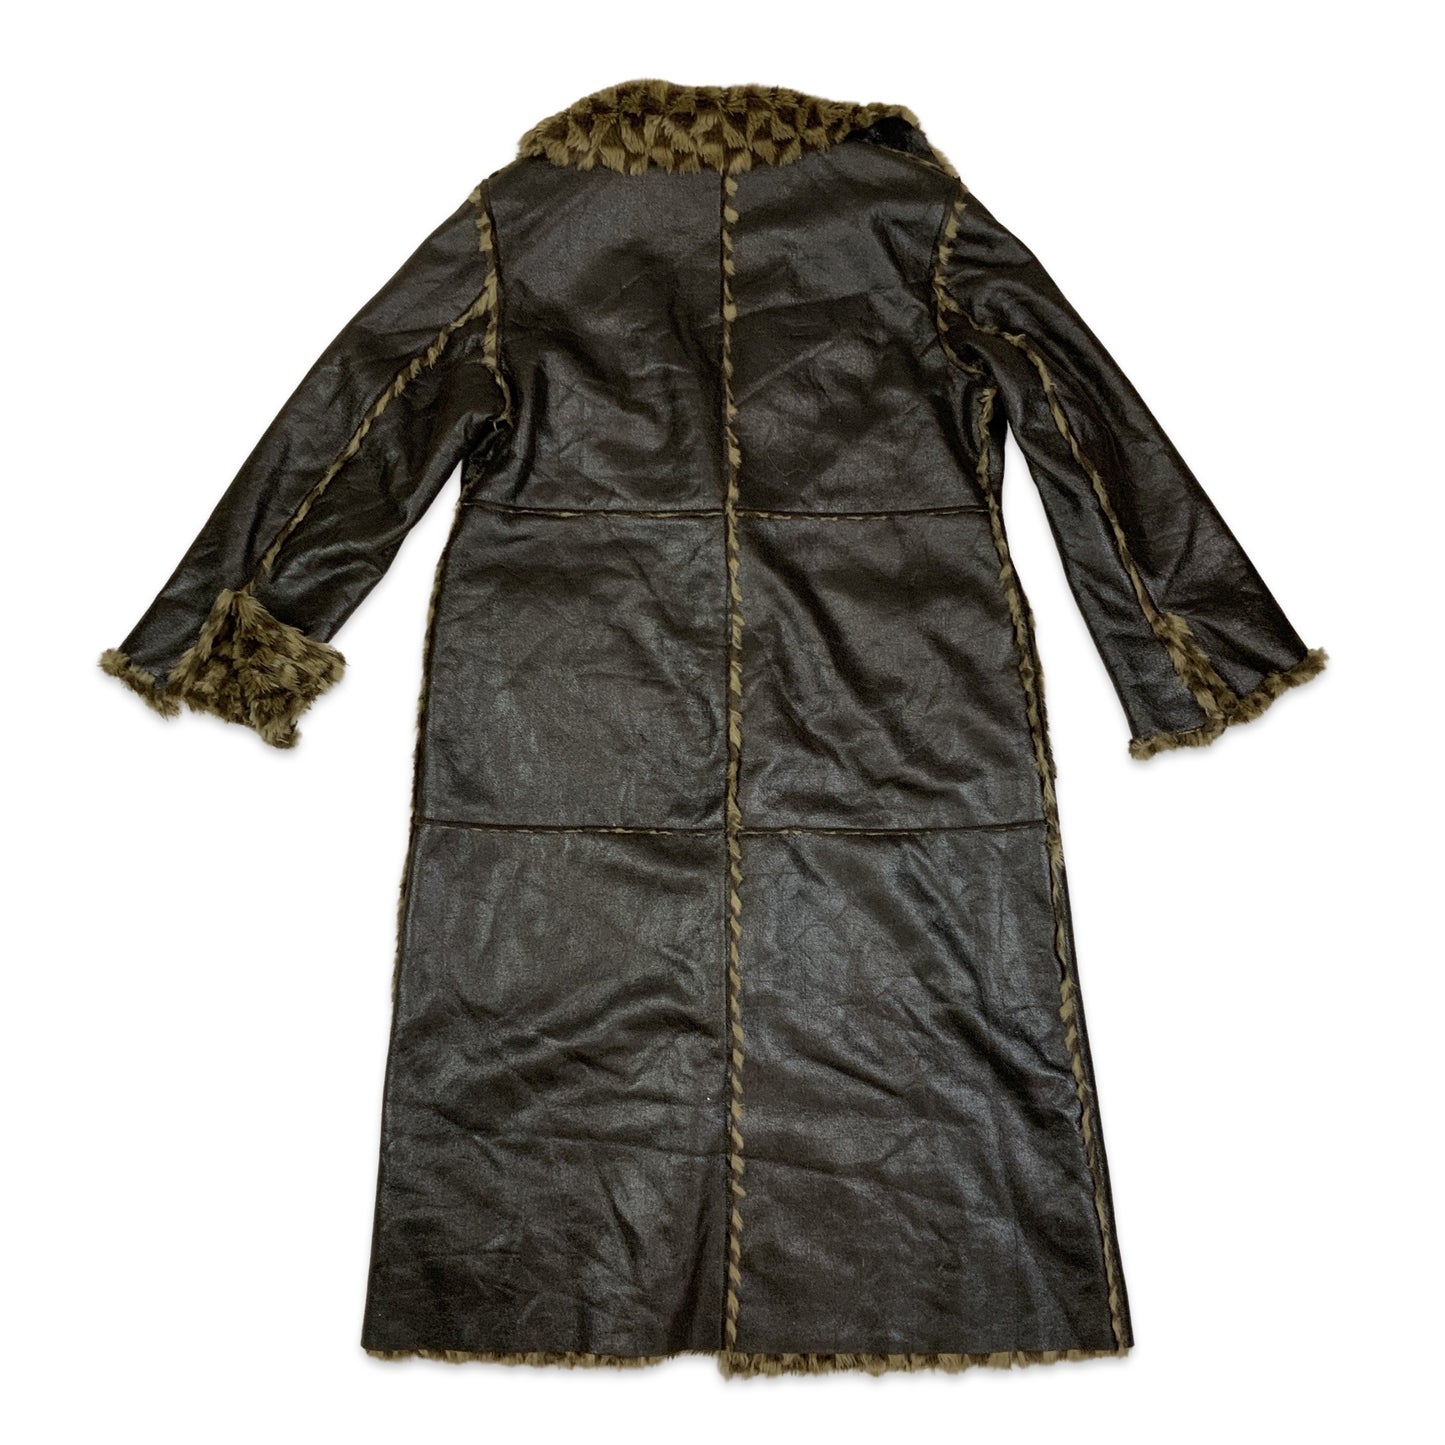 Vintage 90s Brown Shearling Coat with Printed Faux Fur Lining 16 18 20